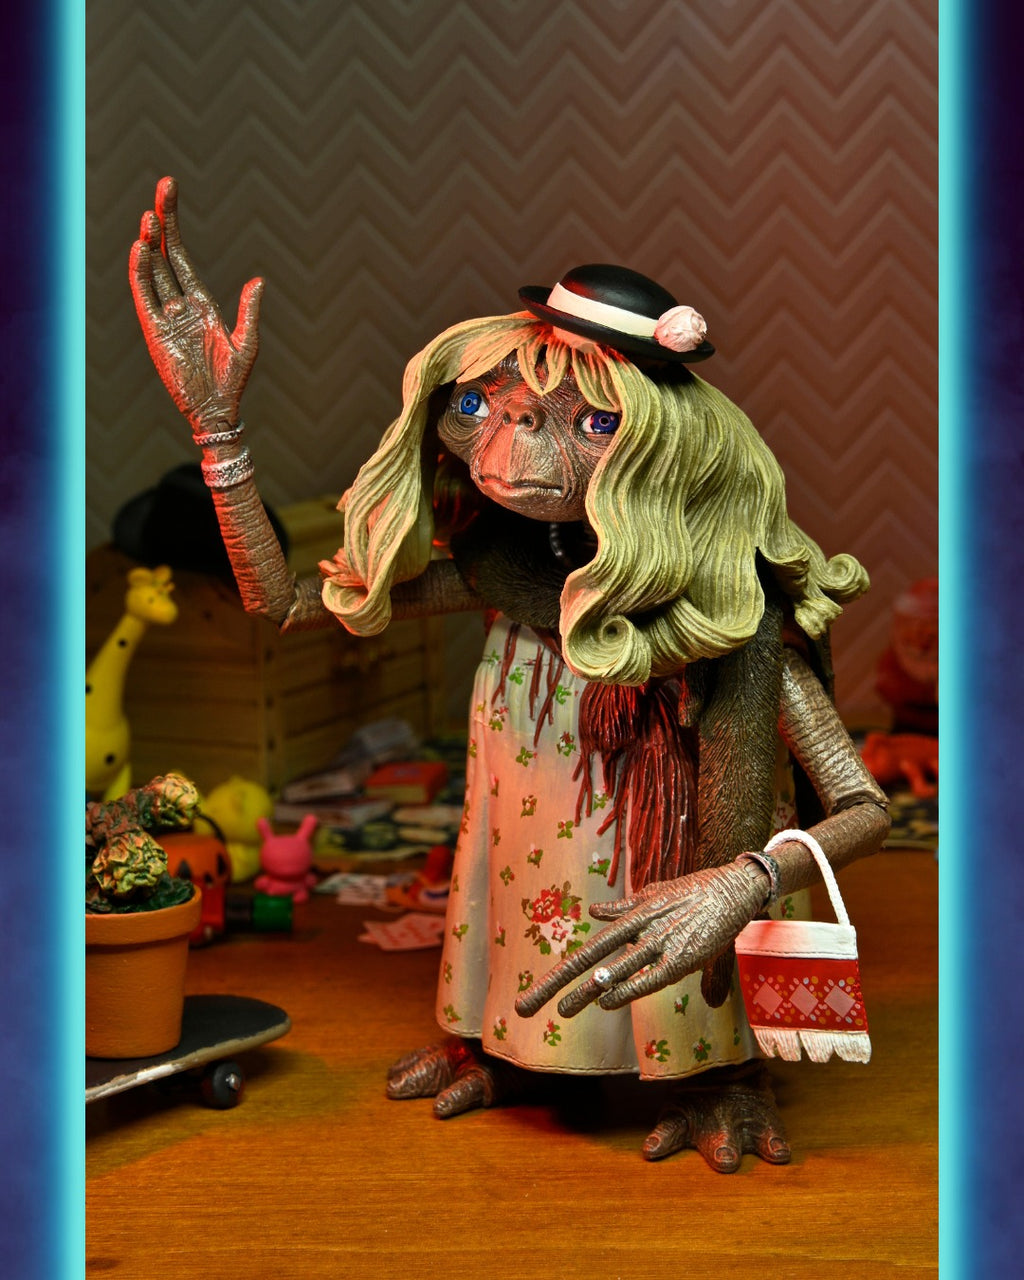 E.T. The Extra-Terrestrial 40th Anniversary Ultimate Dress Up E.T. 7" Scale Action Figure "Pre-Order Dec 2022 Approx"